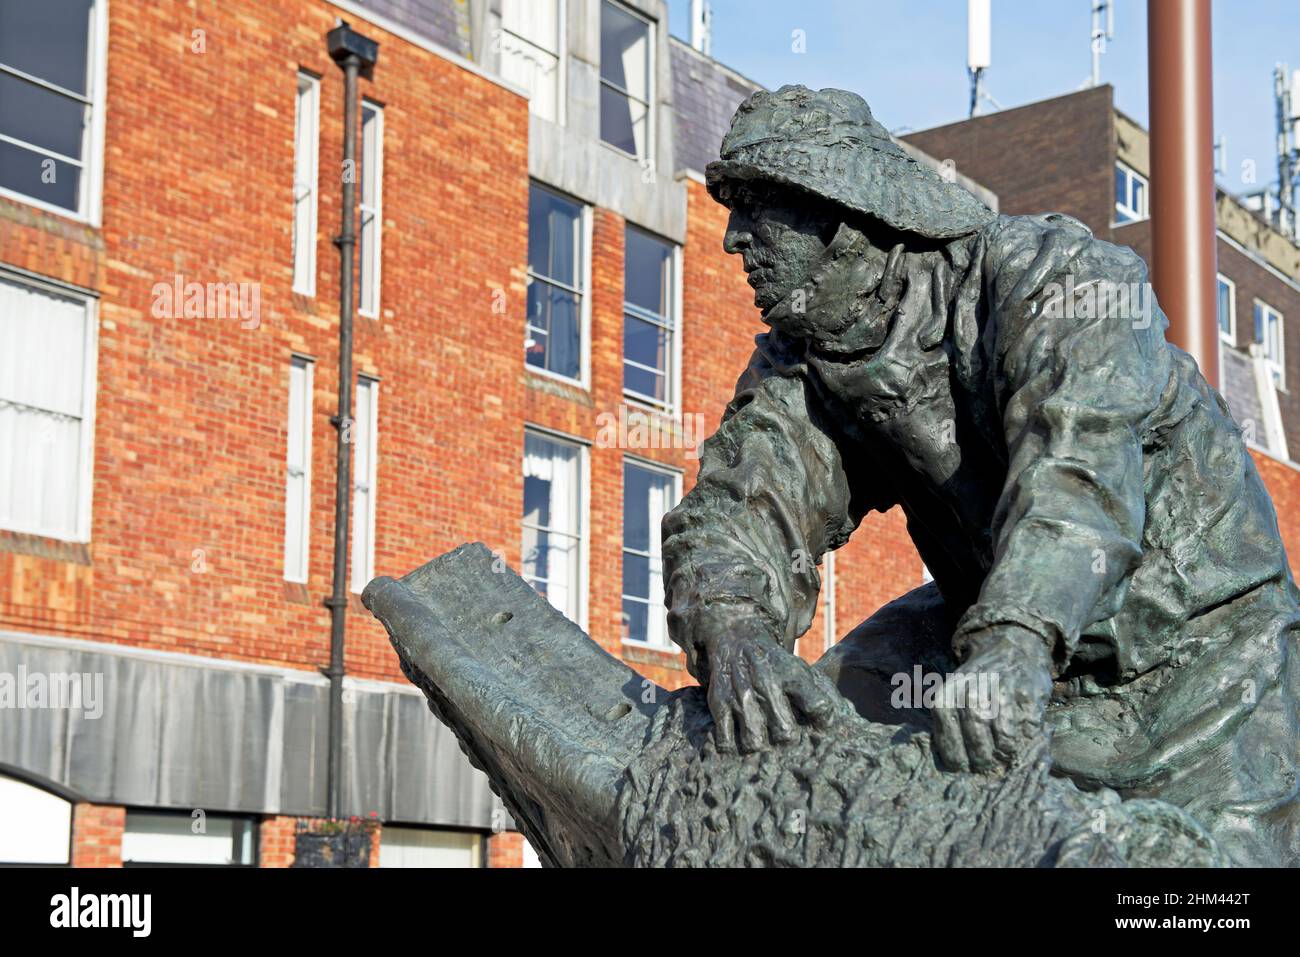 Statue, by sculptor Trevor Harries to remember the fishermen who lost their lives, St James Square, Grimsby, Lincolnshire, England UK Stock Photo